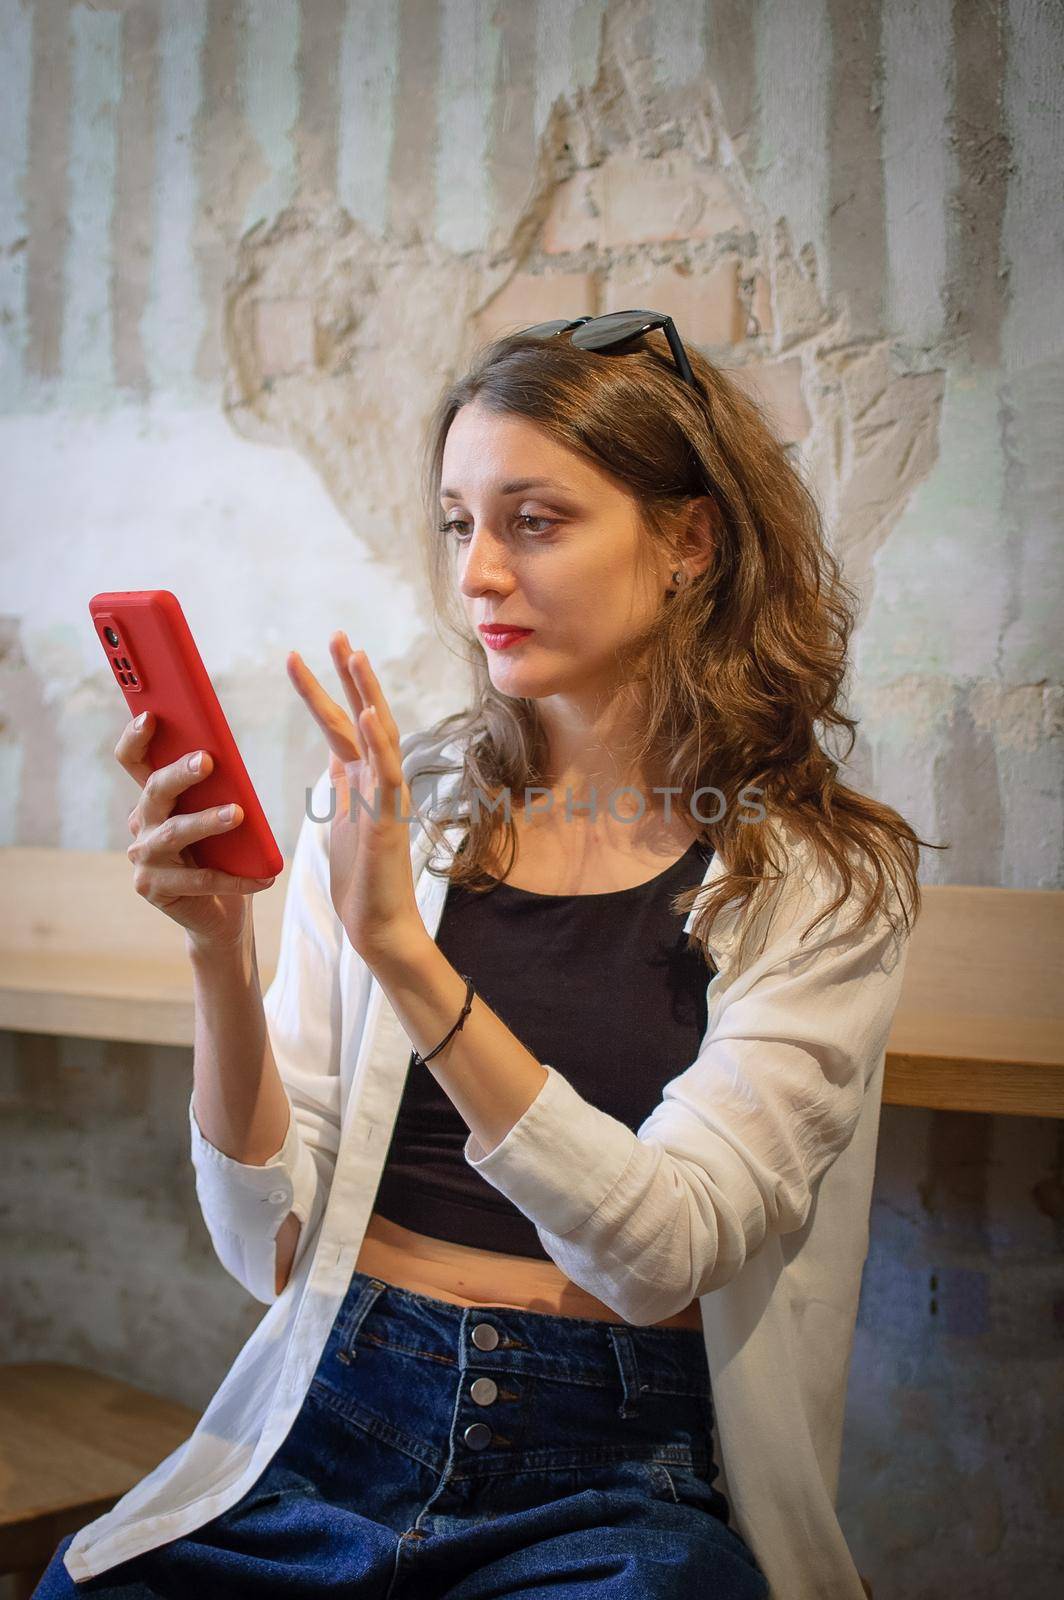 Young woman in white shirt and black top is browsing using her red smartphone to make online shopping or payment sitting indoors on loft wall background, technology, happy people concept by balinska_lv